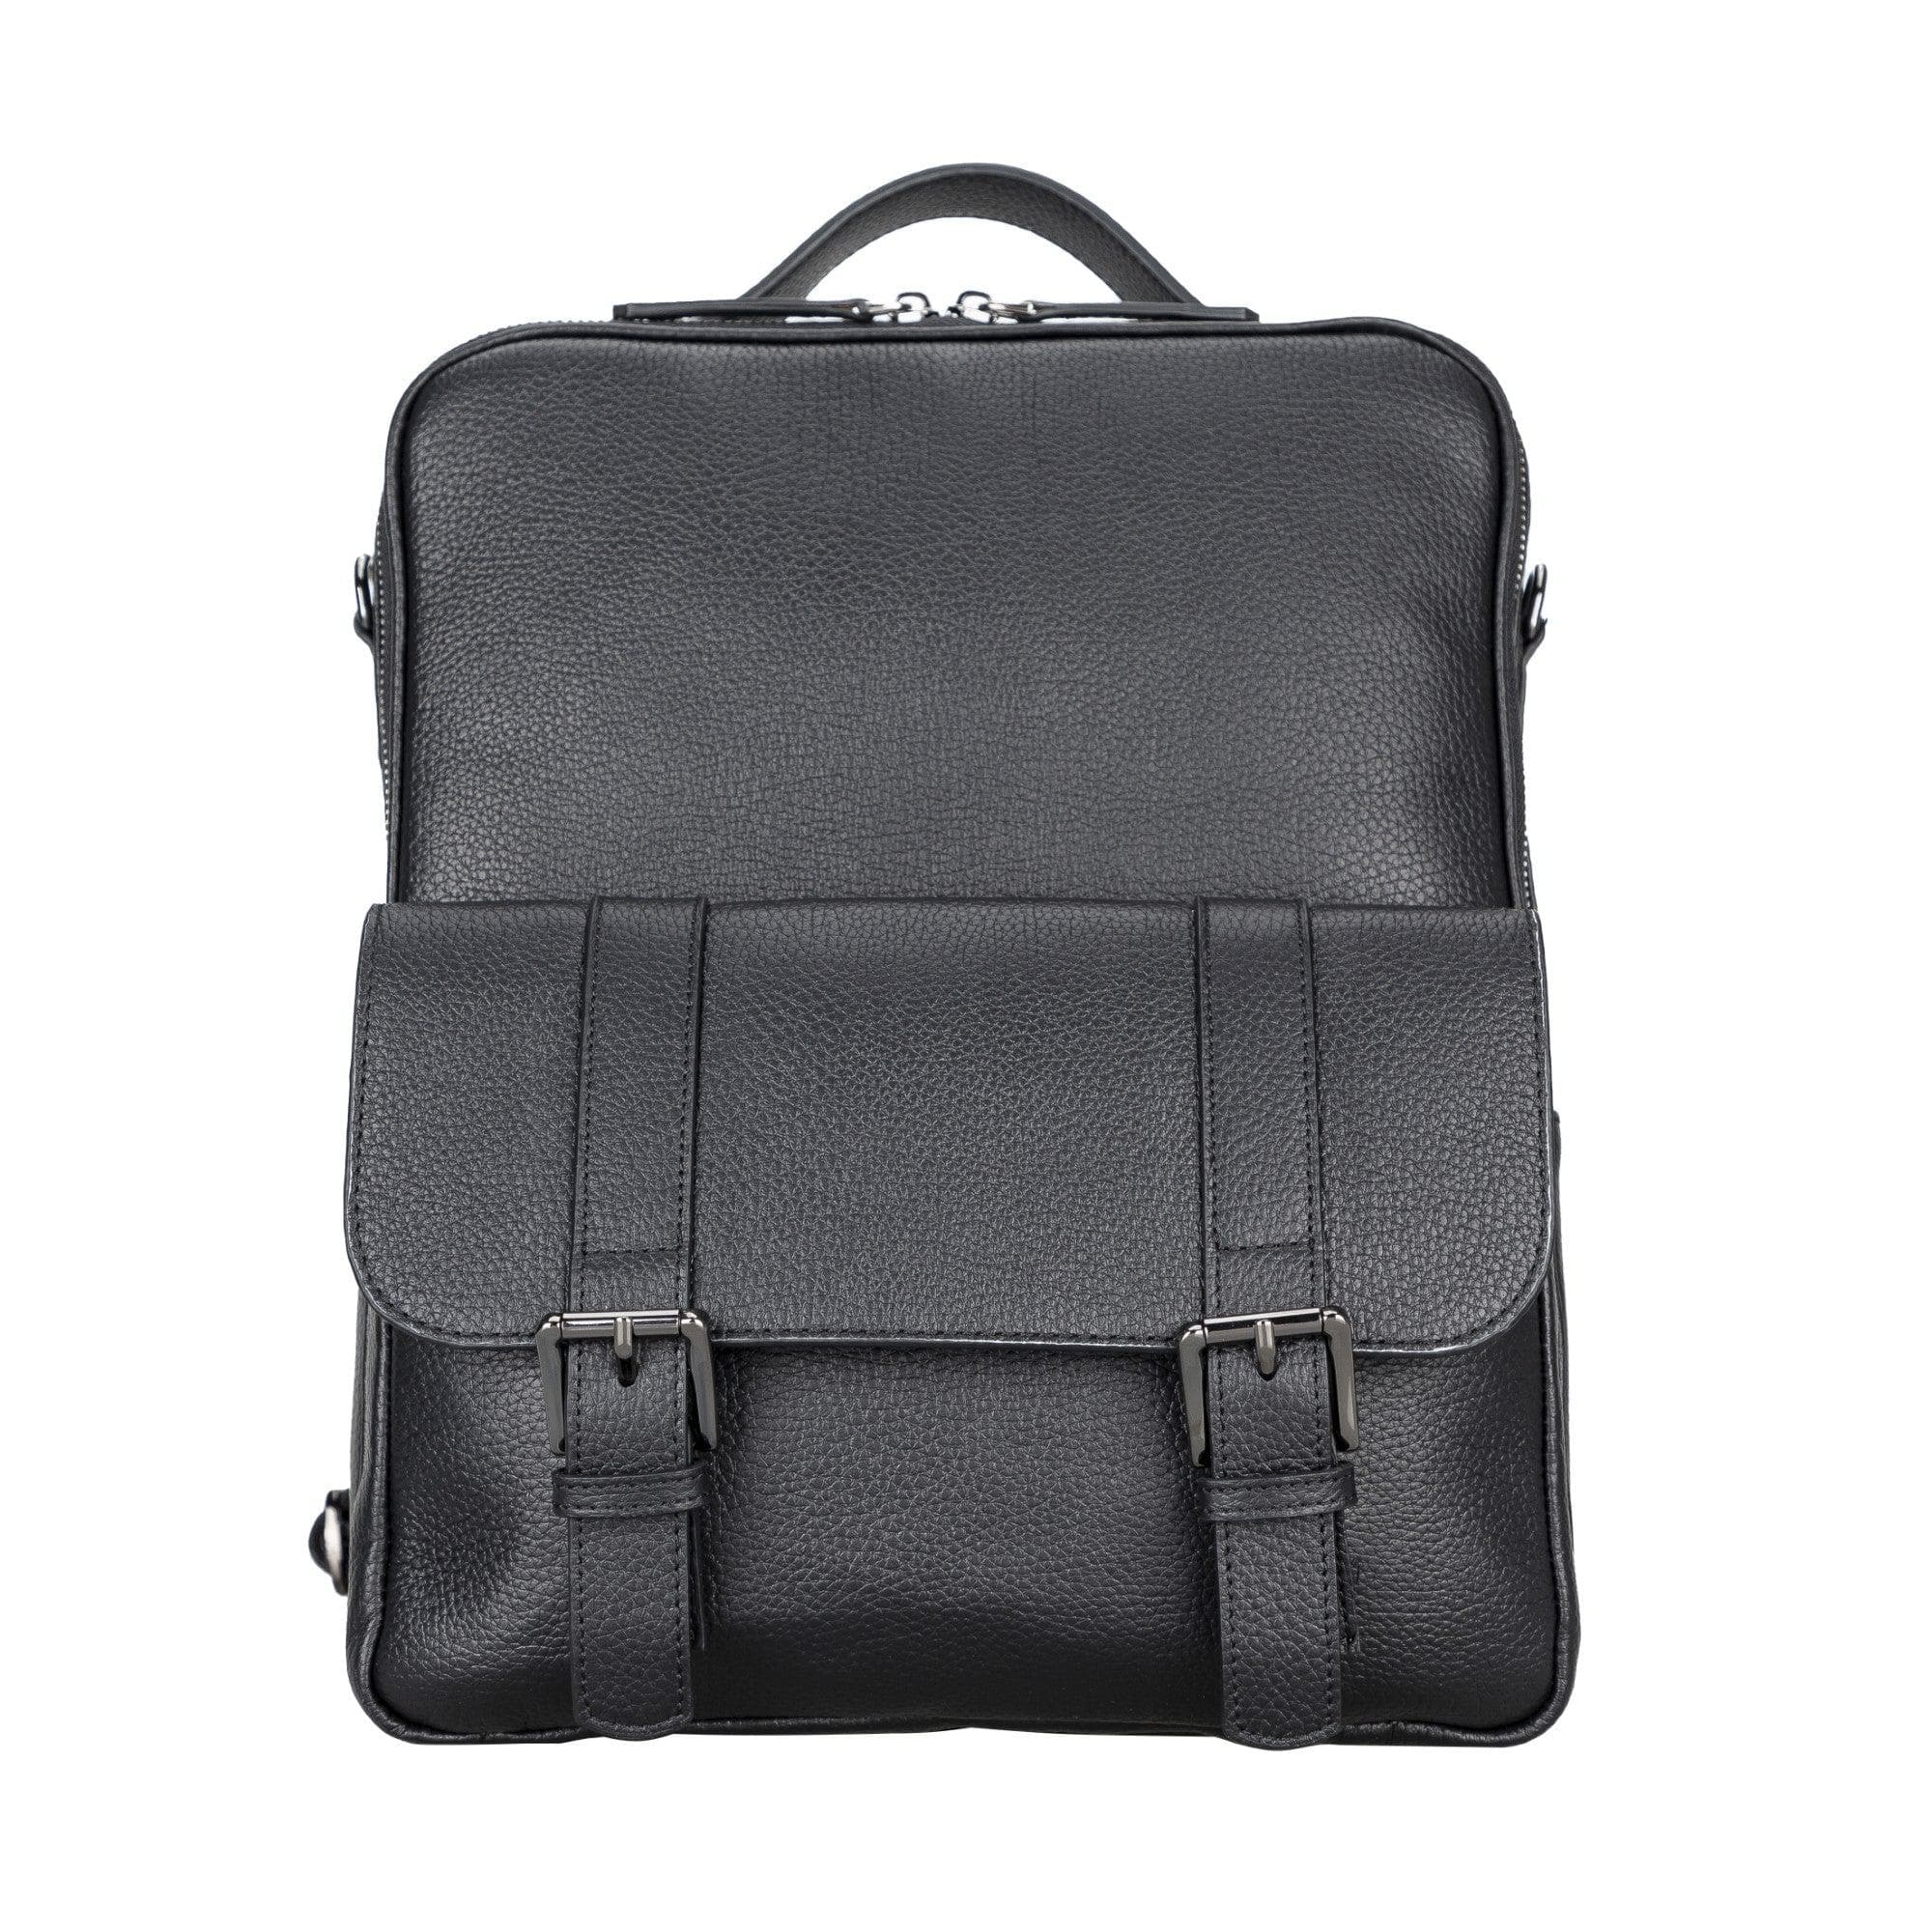 molde-unisex-genuine-leather-backpack-for-daily-life-or-laptop-macbook-37643334090994.jpg